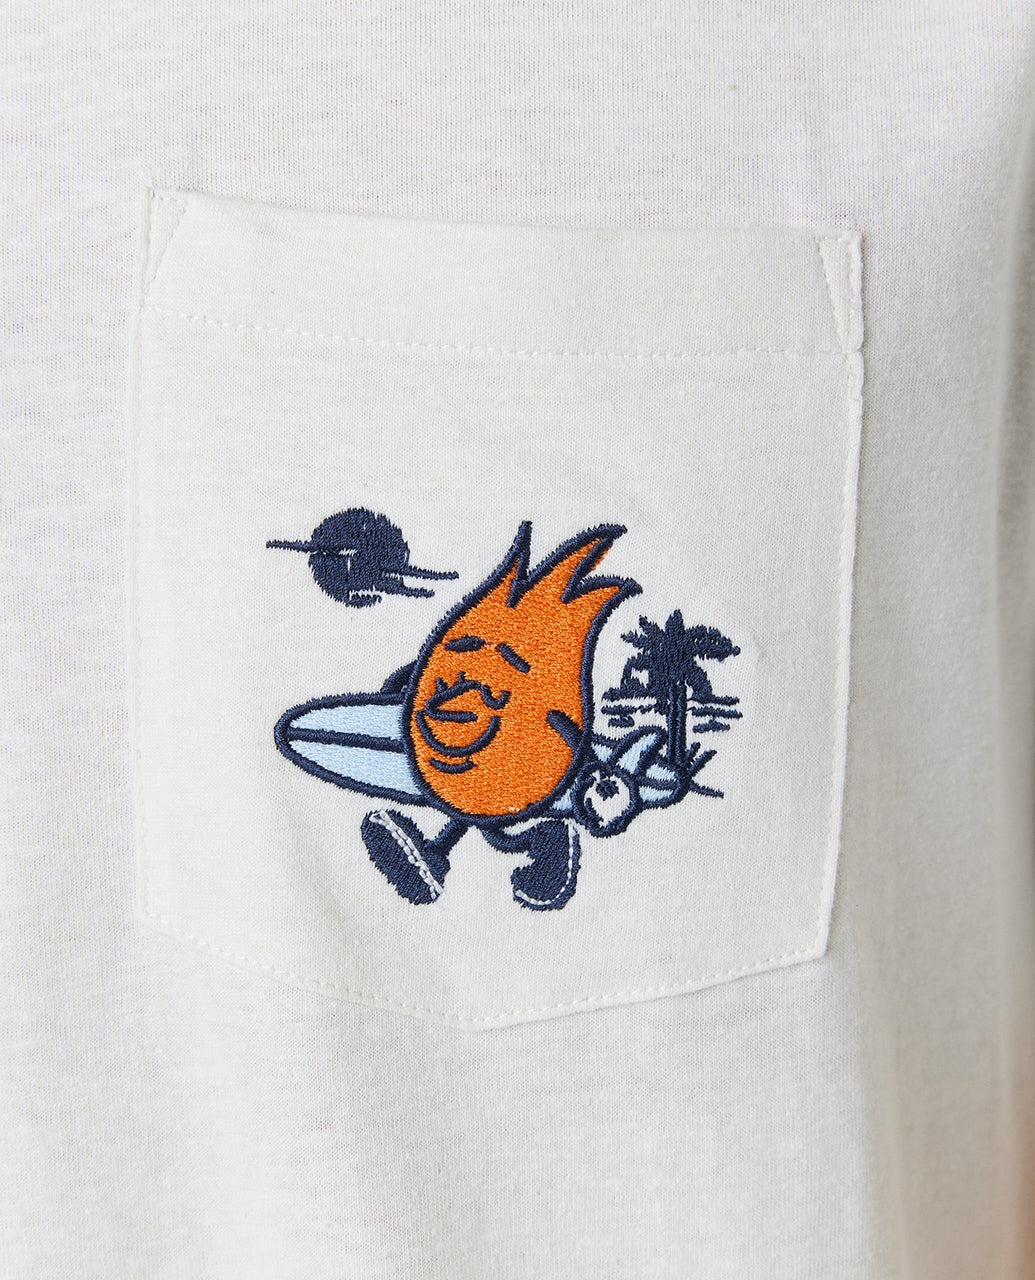 SHAPER EMBROIDERY SS TEE